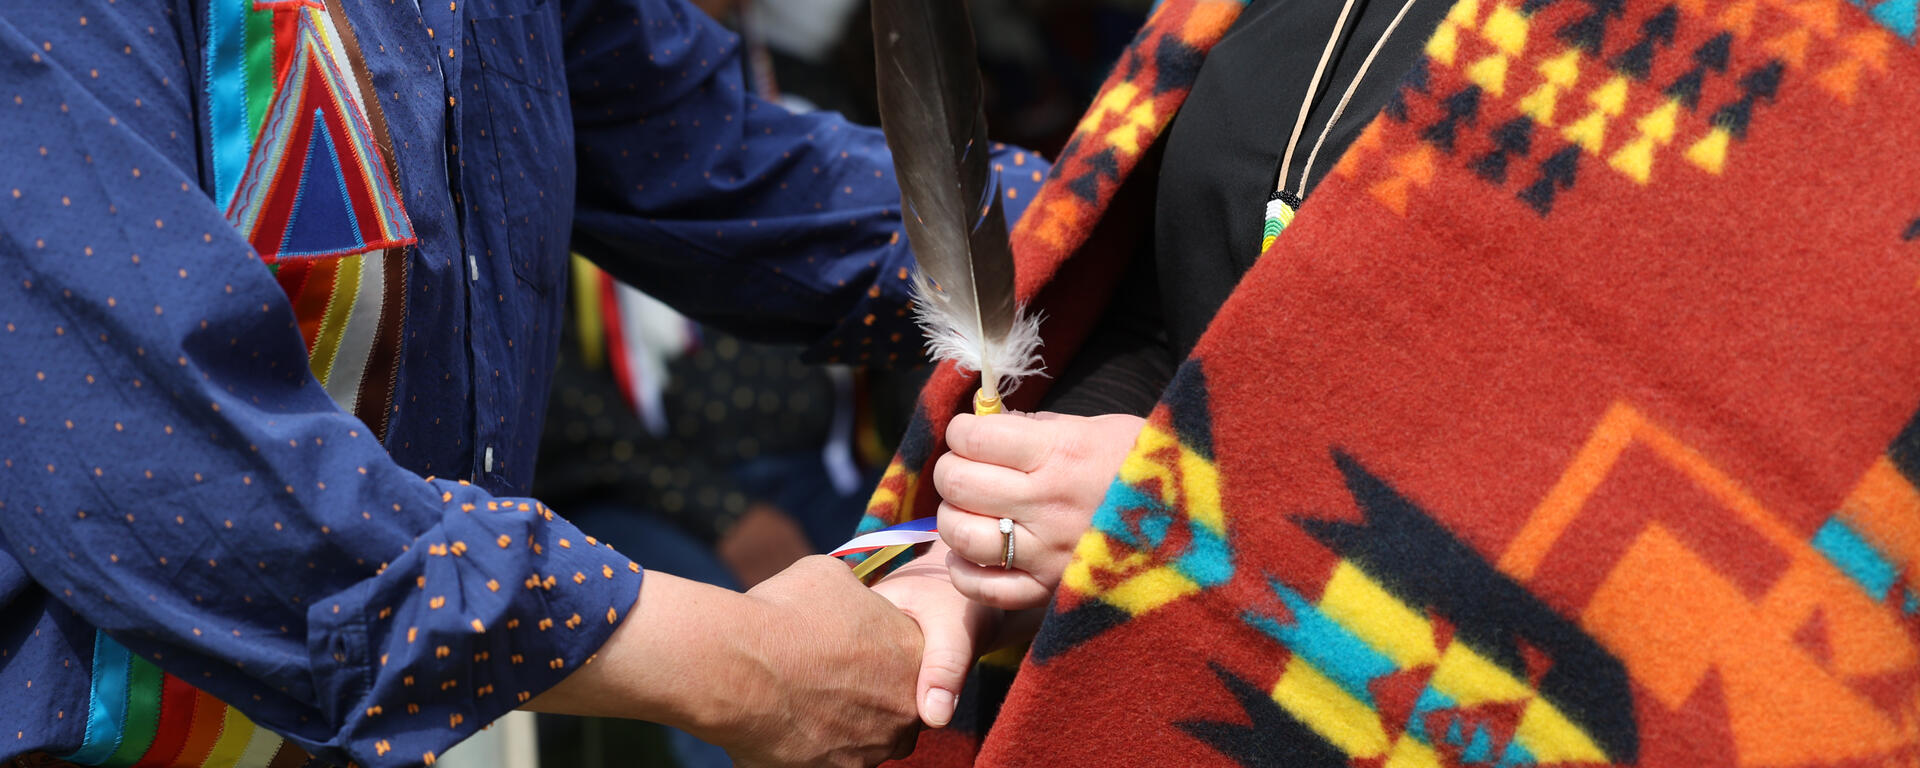 Someone in a ribbon shirt shakes hands with a person wearing a blanket and holding a feather.